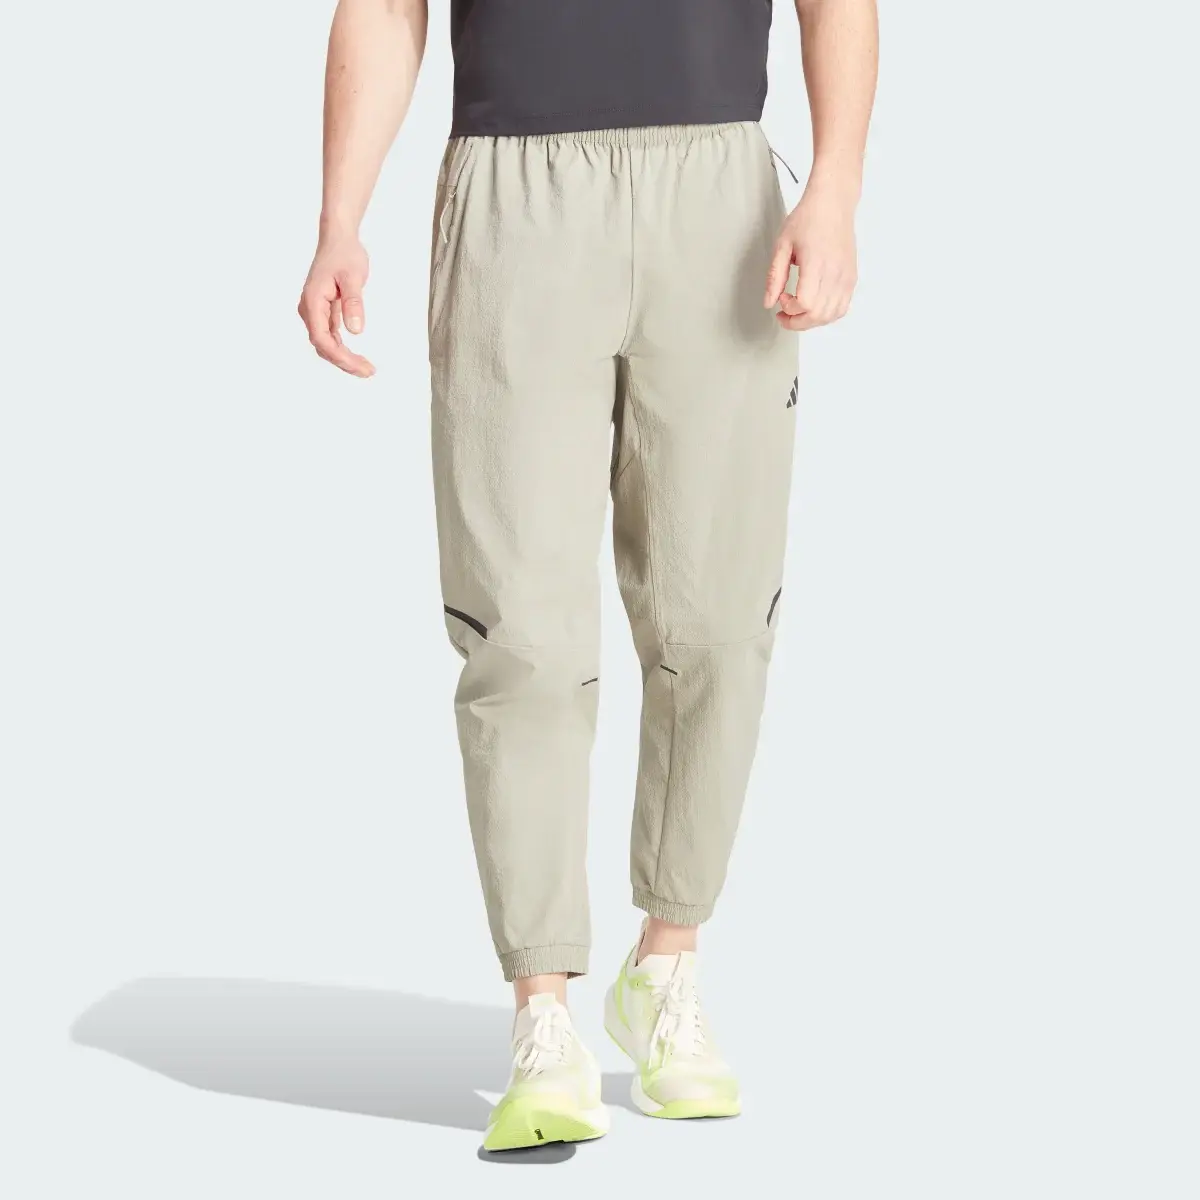 Adidas Designed for Training Workout Joggers. 2